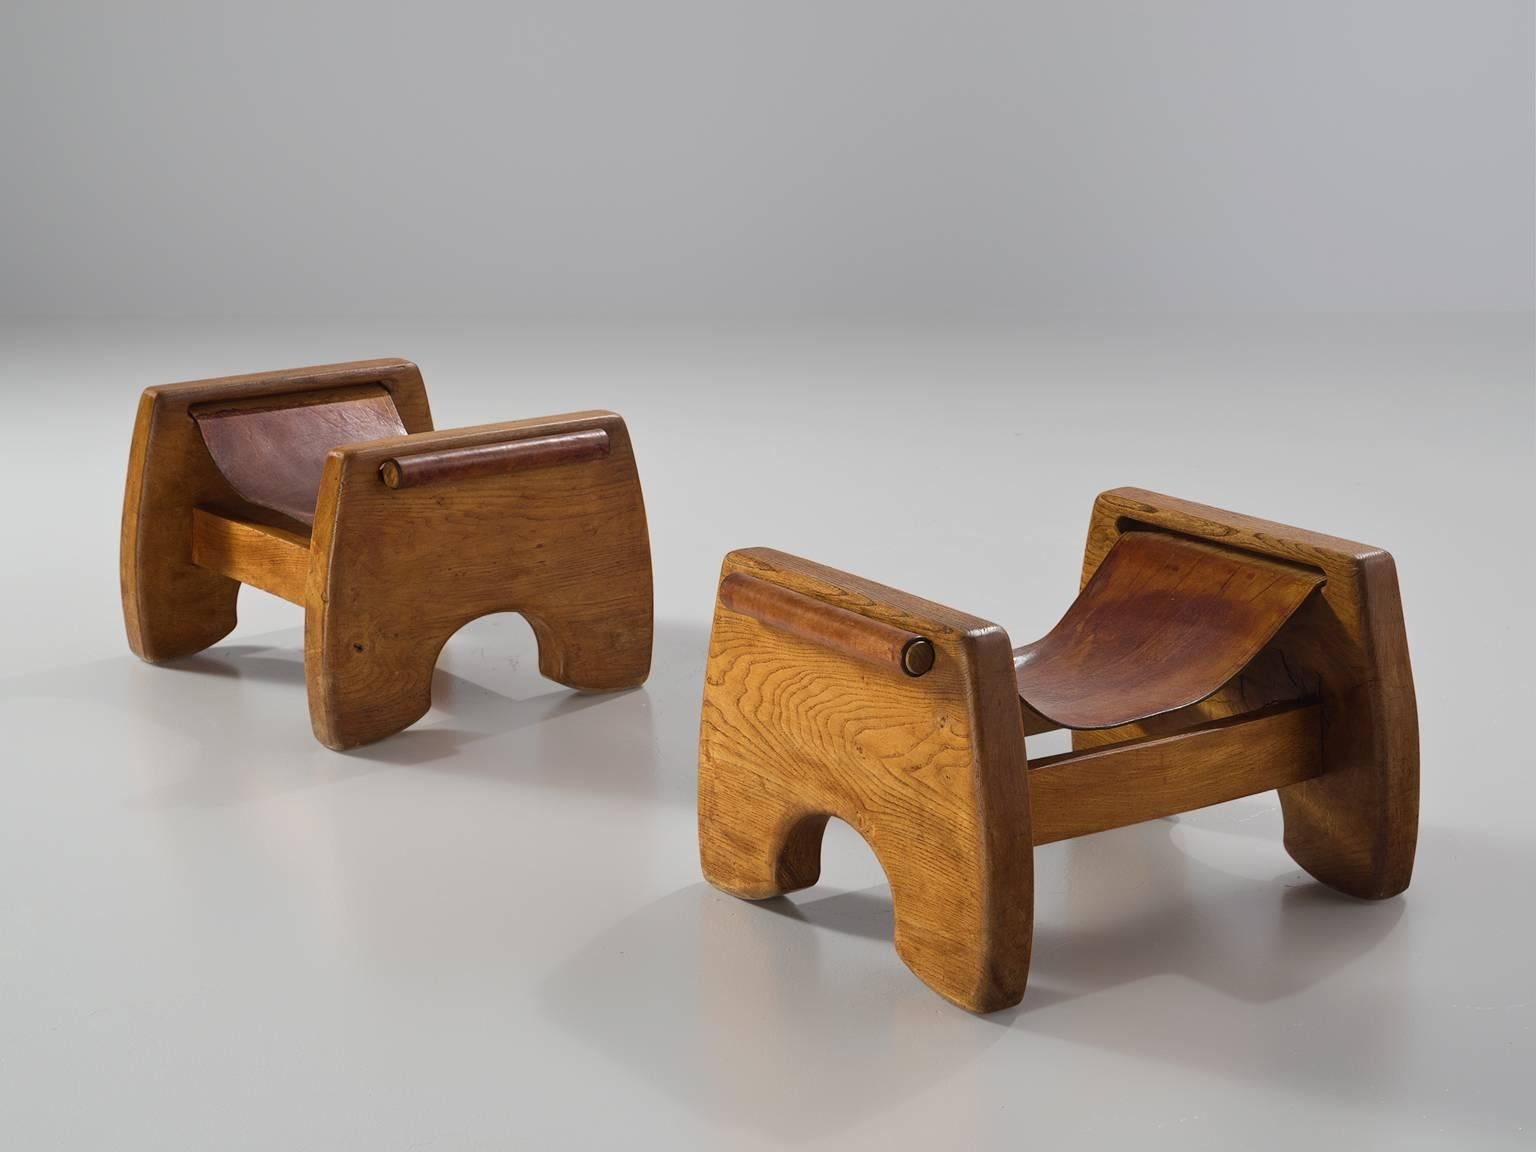 Stools, oak and cognac leather, France, 1930s

This robust and rustic set of stools draws its strength from both the strong design and the use of natural, sturdy materials. The sculptural, dense ook frame consists of two U-shaped sides and